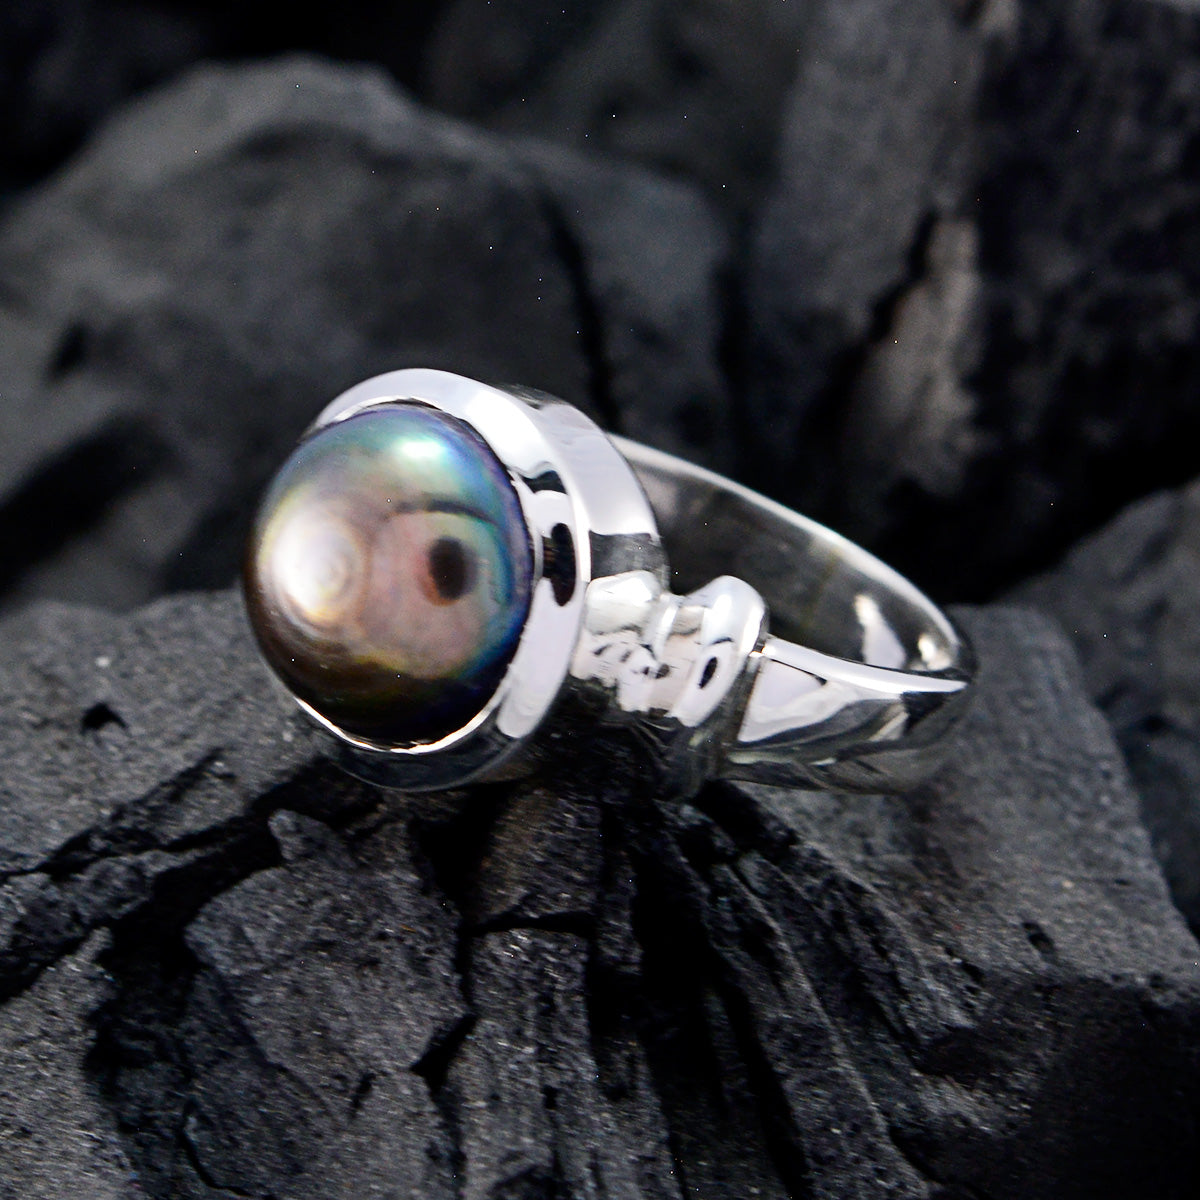 Bewitching Gemstones Pearl 925 Sterling Silver Ring Dance Jewelry